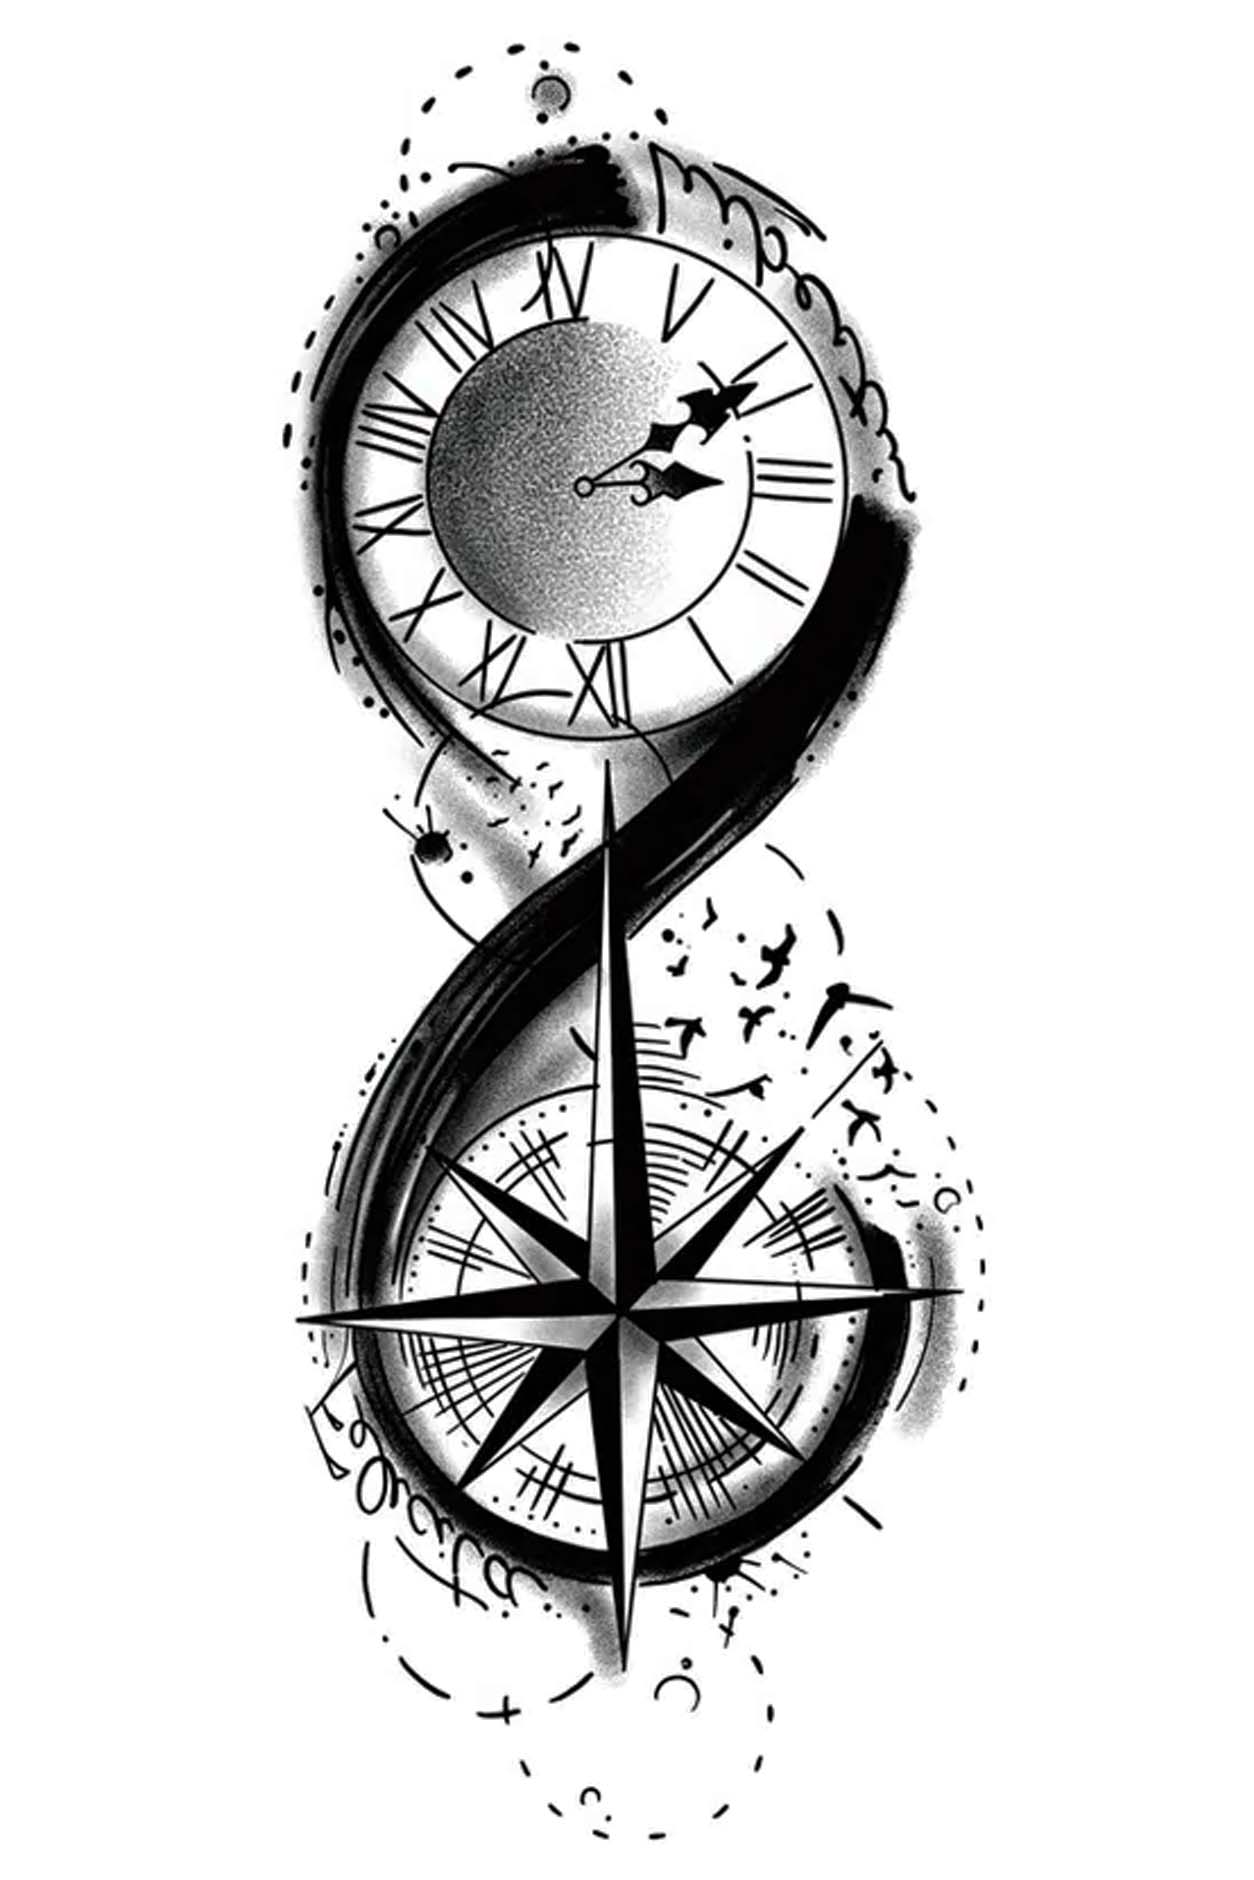 It is time to head in the right direction. When paired with a compass, this clock tattoo represents life's direction and path. The text around the objects is Liberti which means the power to please, while Felicita's immense happiness, birds, and circles add flow to complete the art. Asymmetrical artwork in a figure eight shape